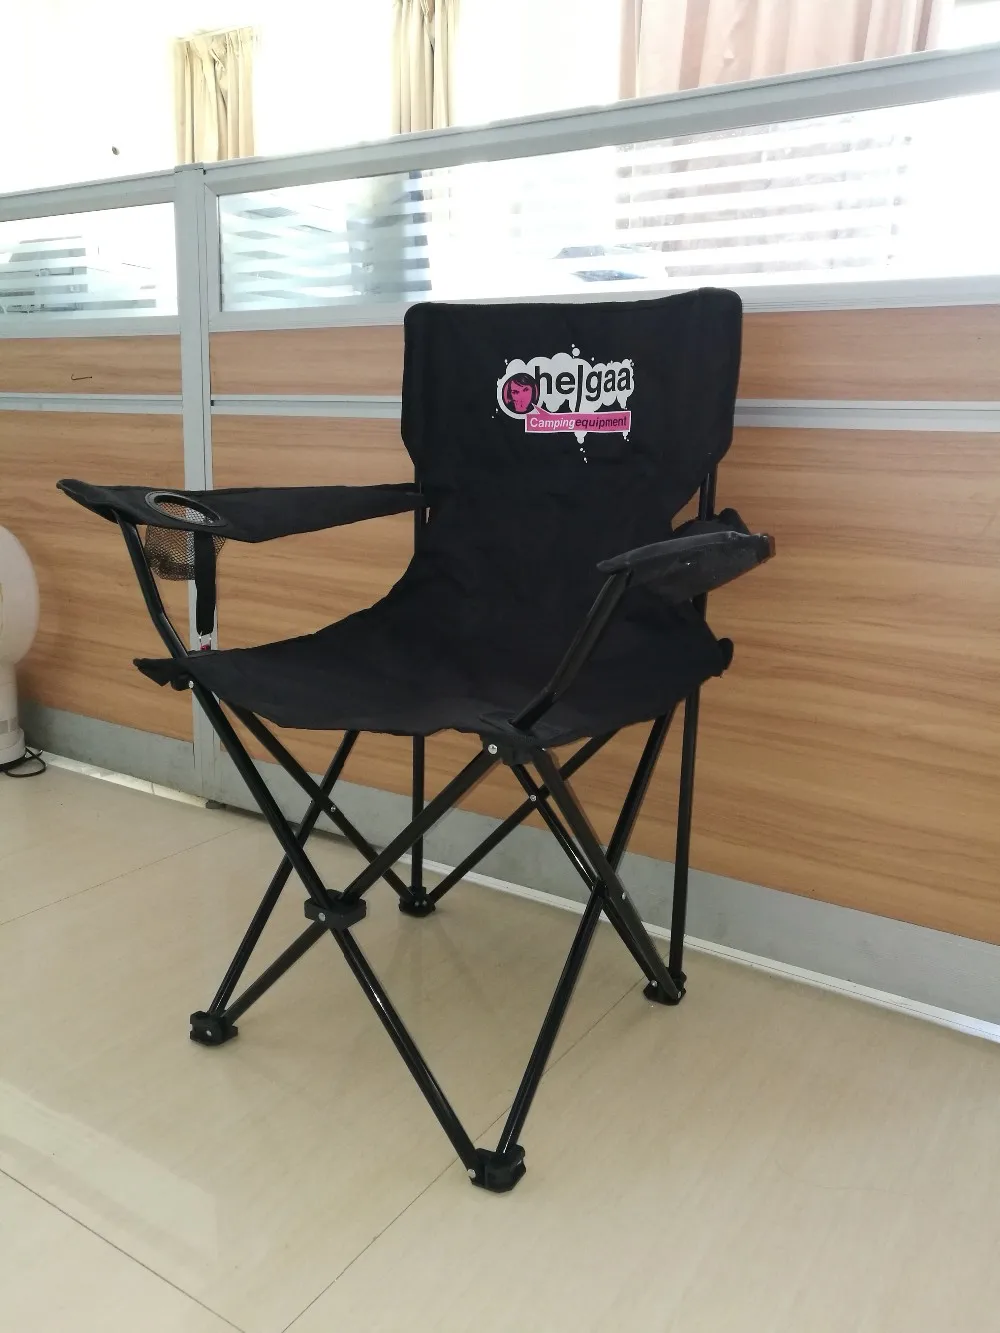 Camping Chair With Cup Holders - Buy Message Chair With Bottle Opener,Aldi Camping Chair Product ...